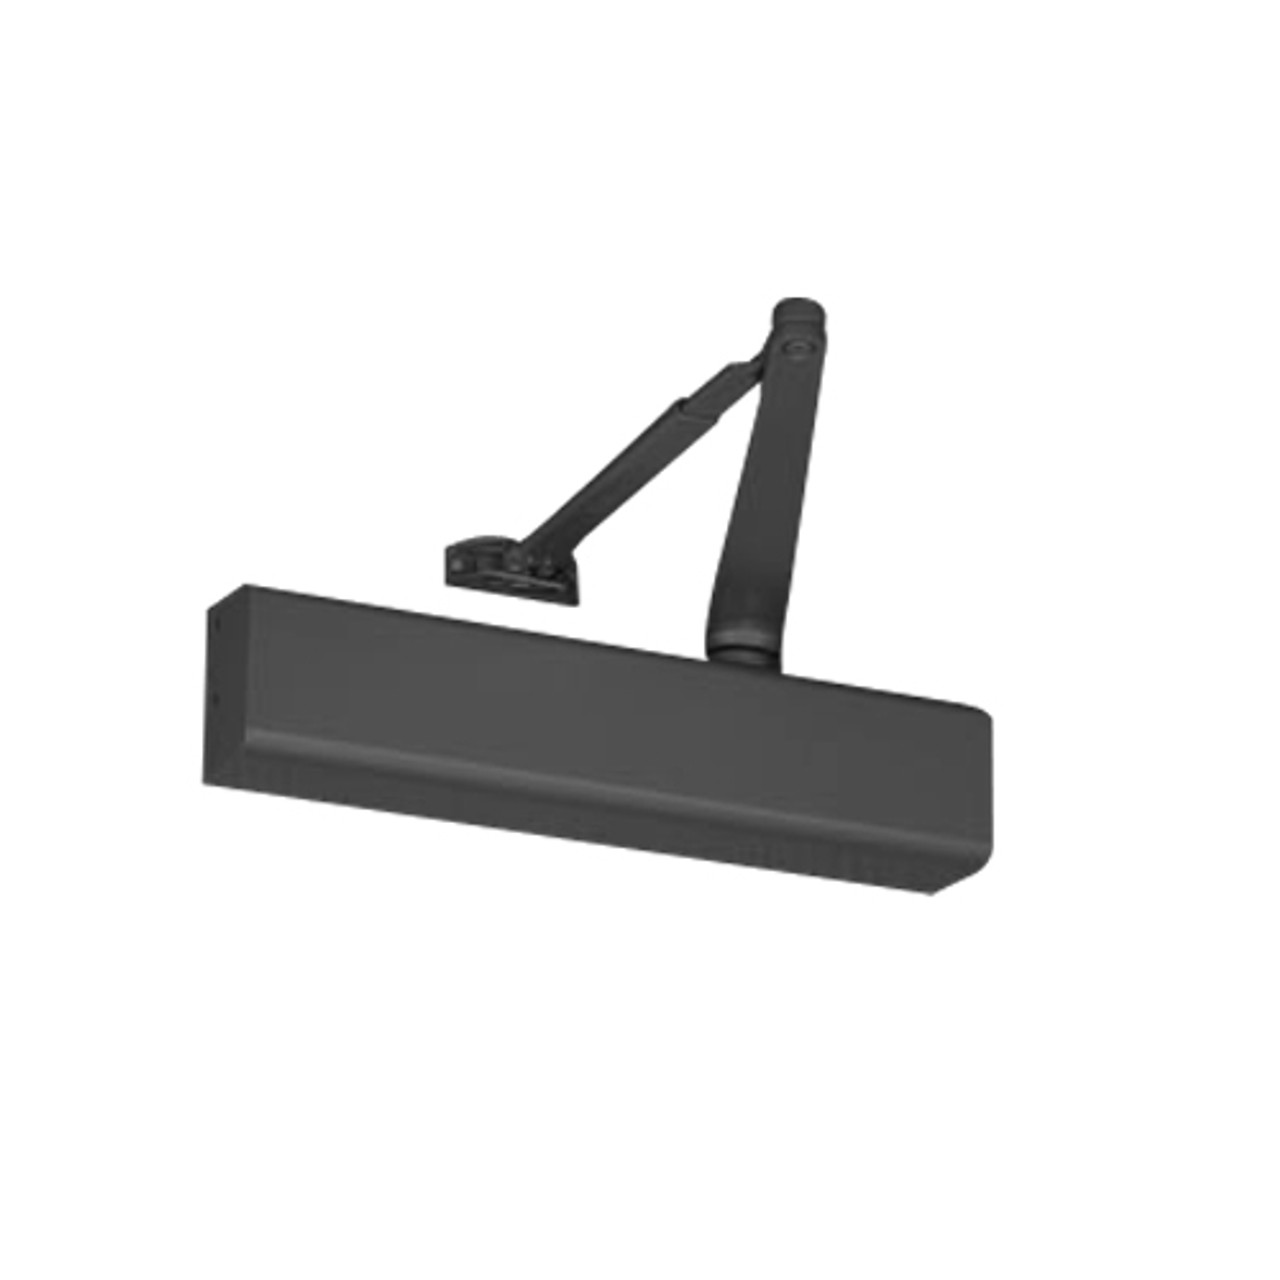 8581-693 Norton 8000 Series Full Cover Non-Hold Open Door Closers with Regular Low Profile Arm in Black Finish